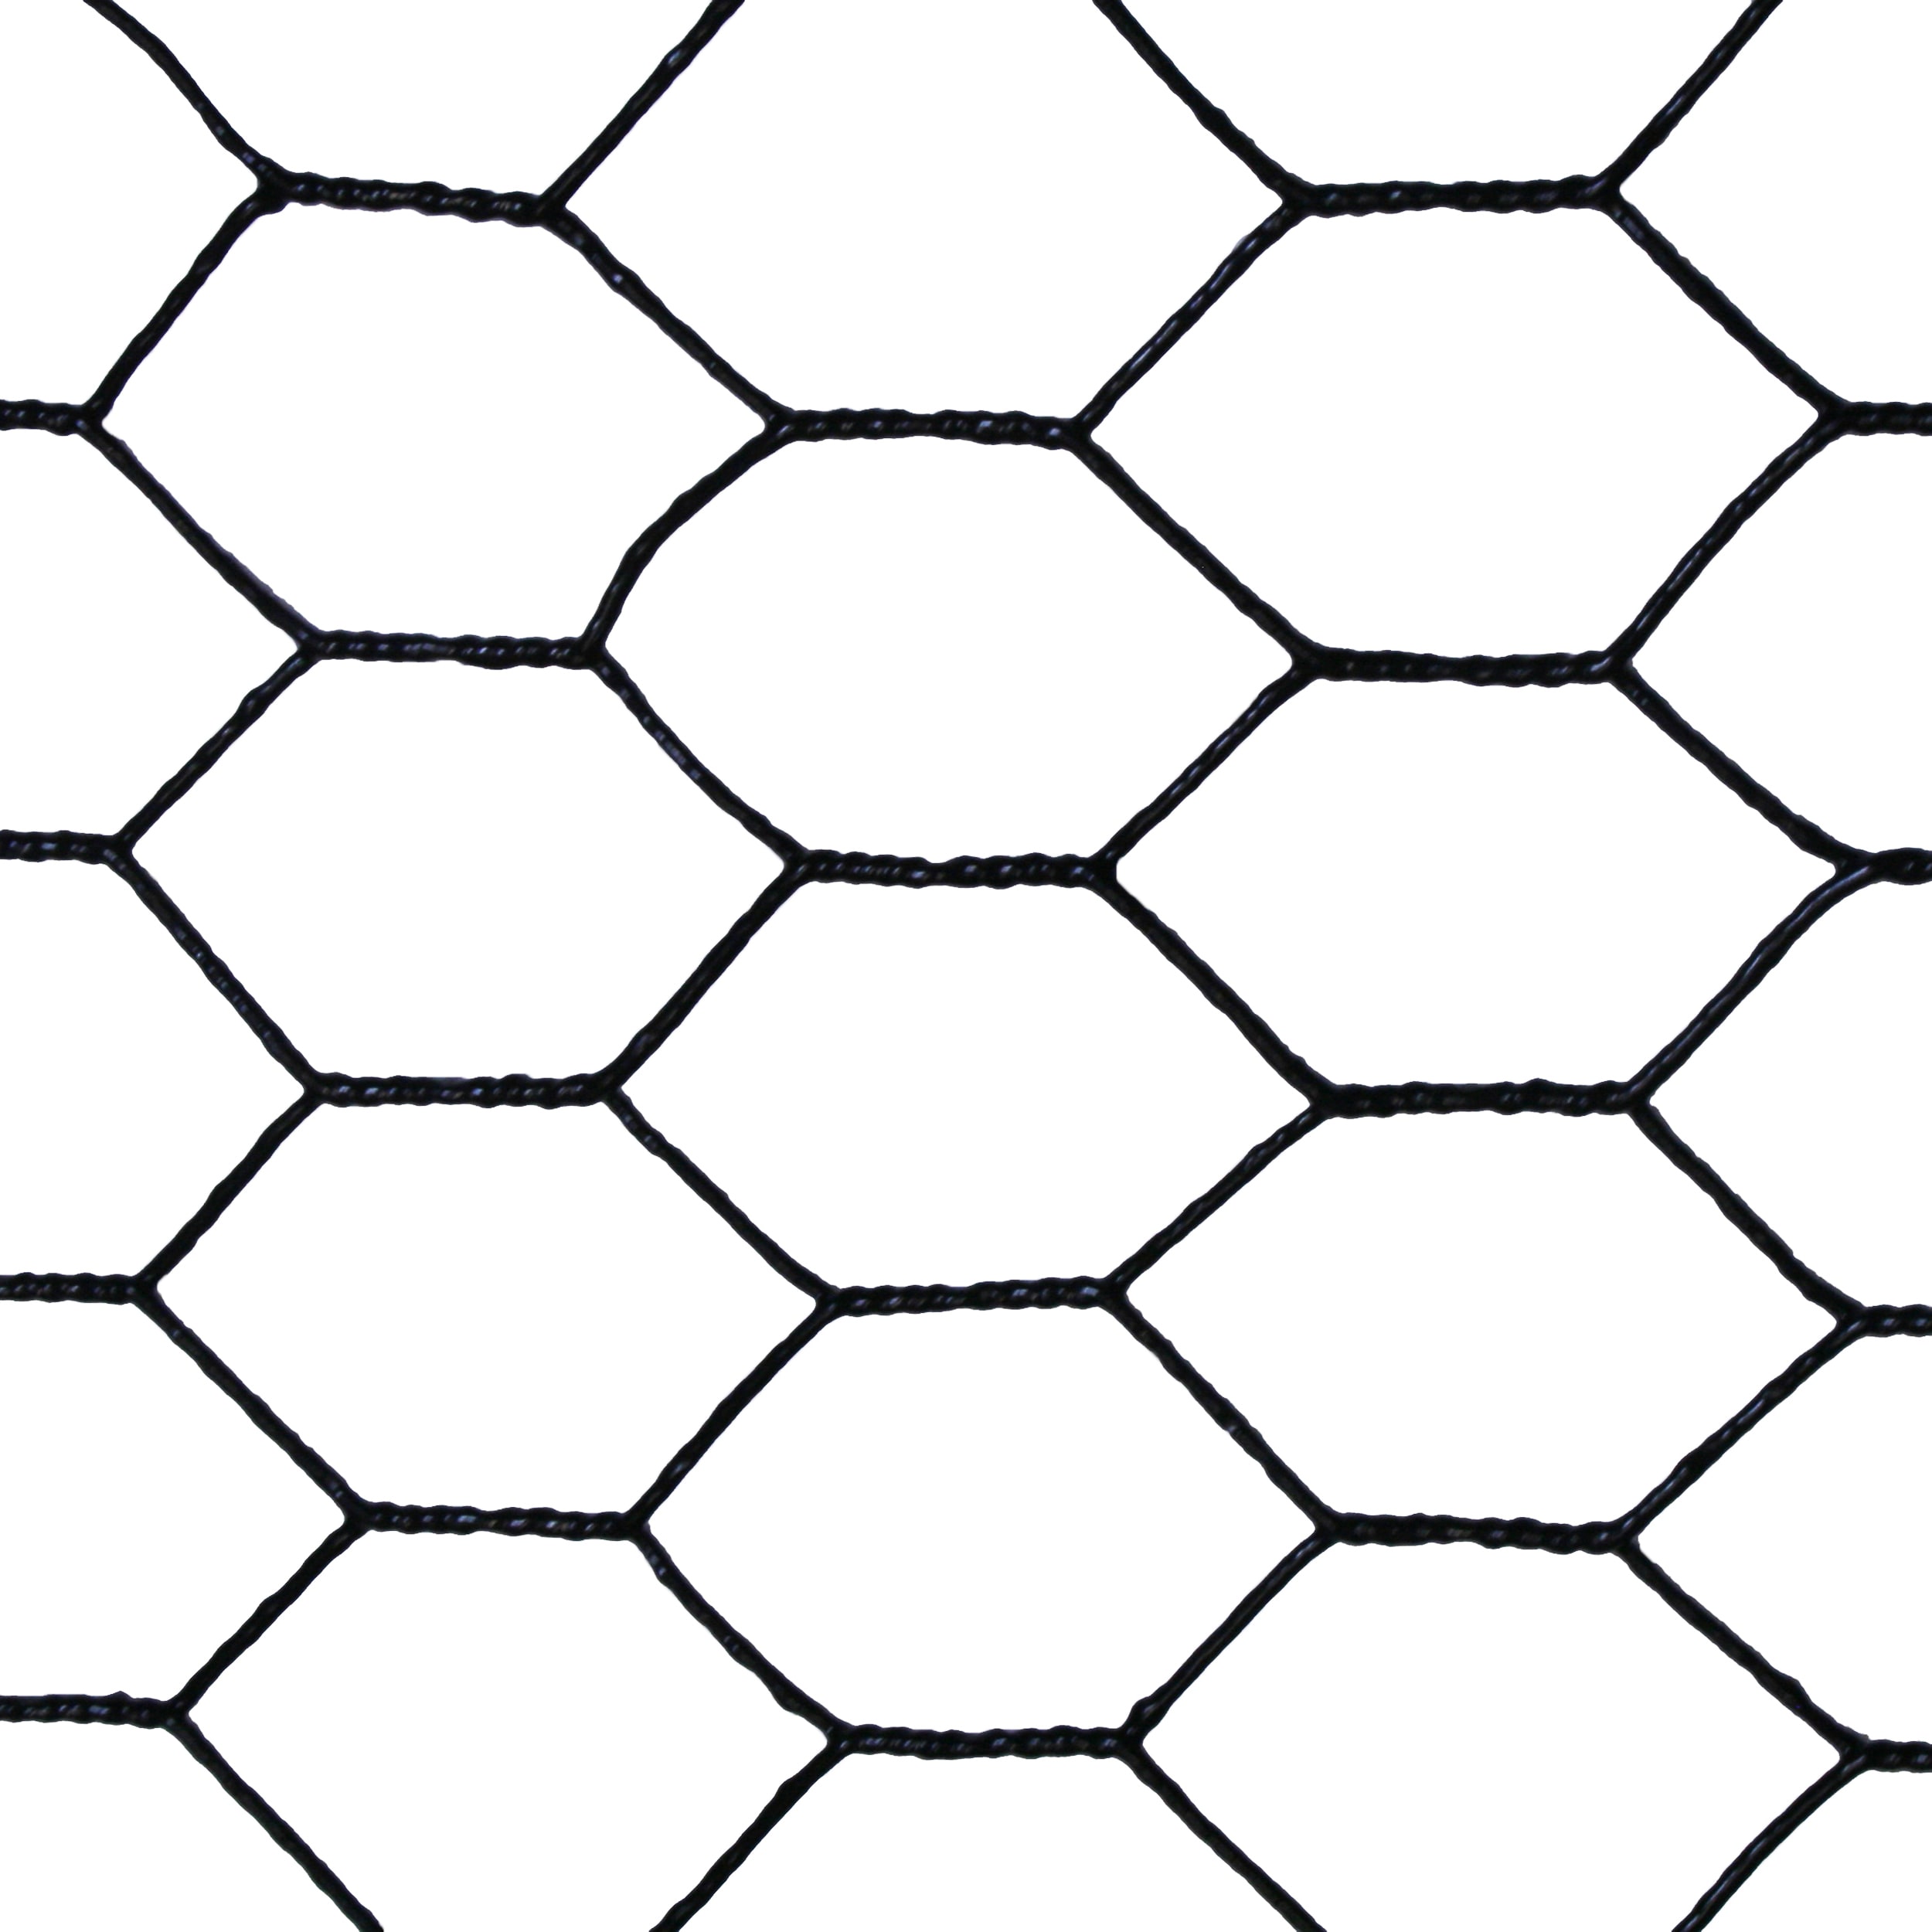 Fencer Wire NV19-B3X150MF34 150 ft. x 12 x 36 in. Vinyl Coated Hex Netting, Black